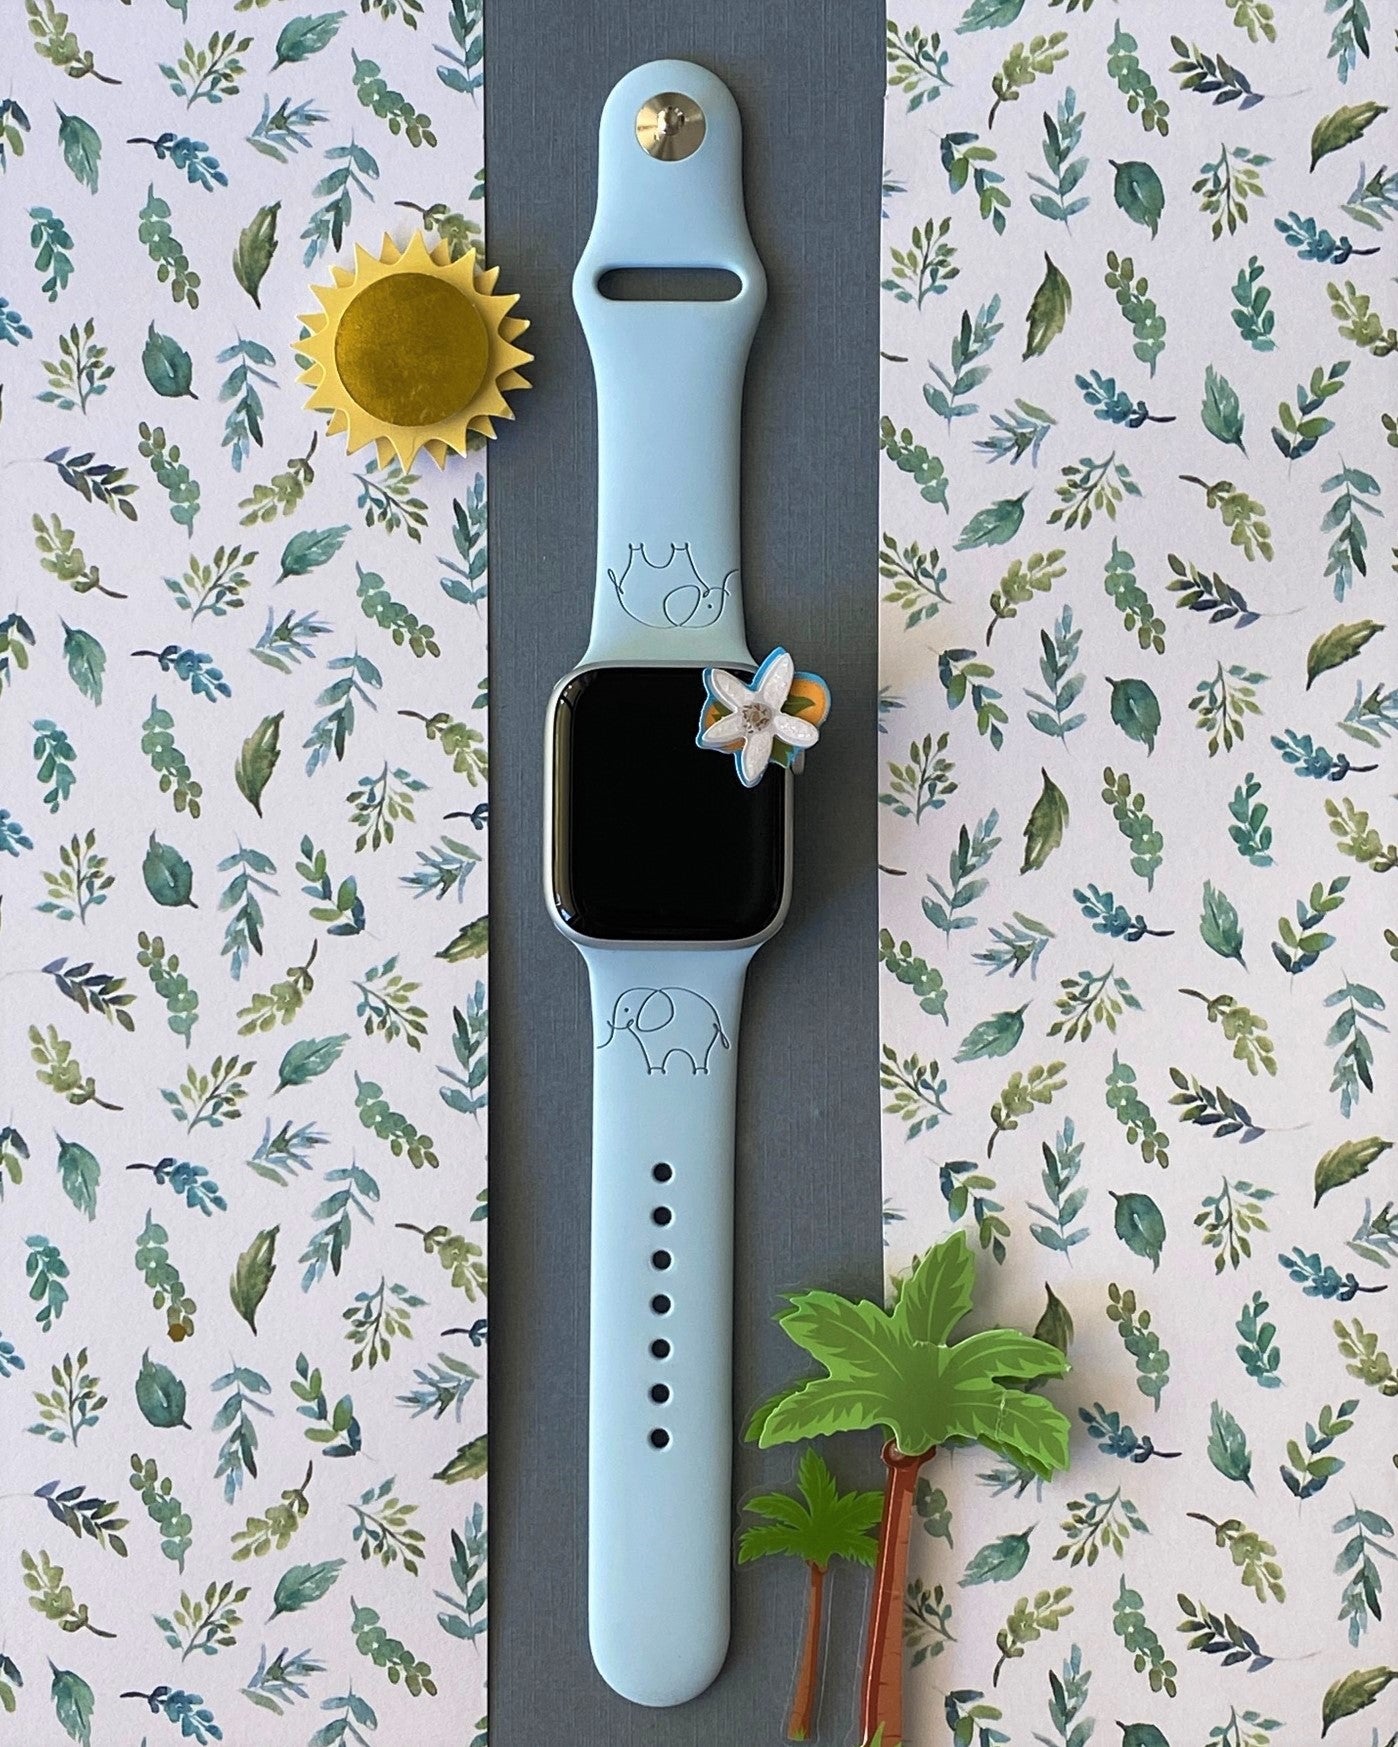 Elephants Indian Style Print Apple Watch Band 38mm / 40mm / 